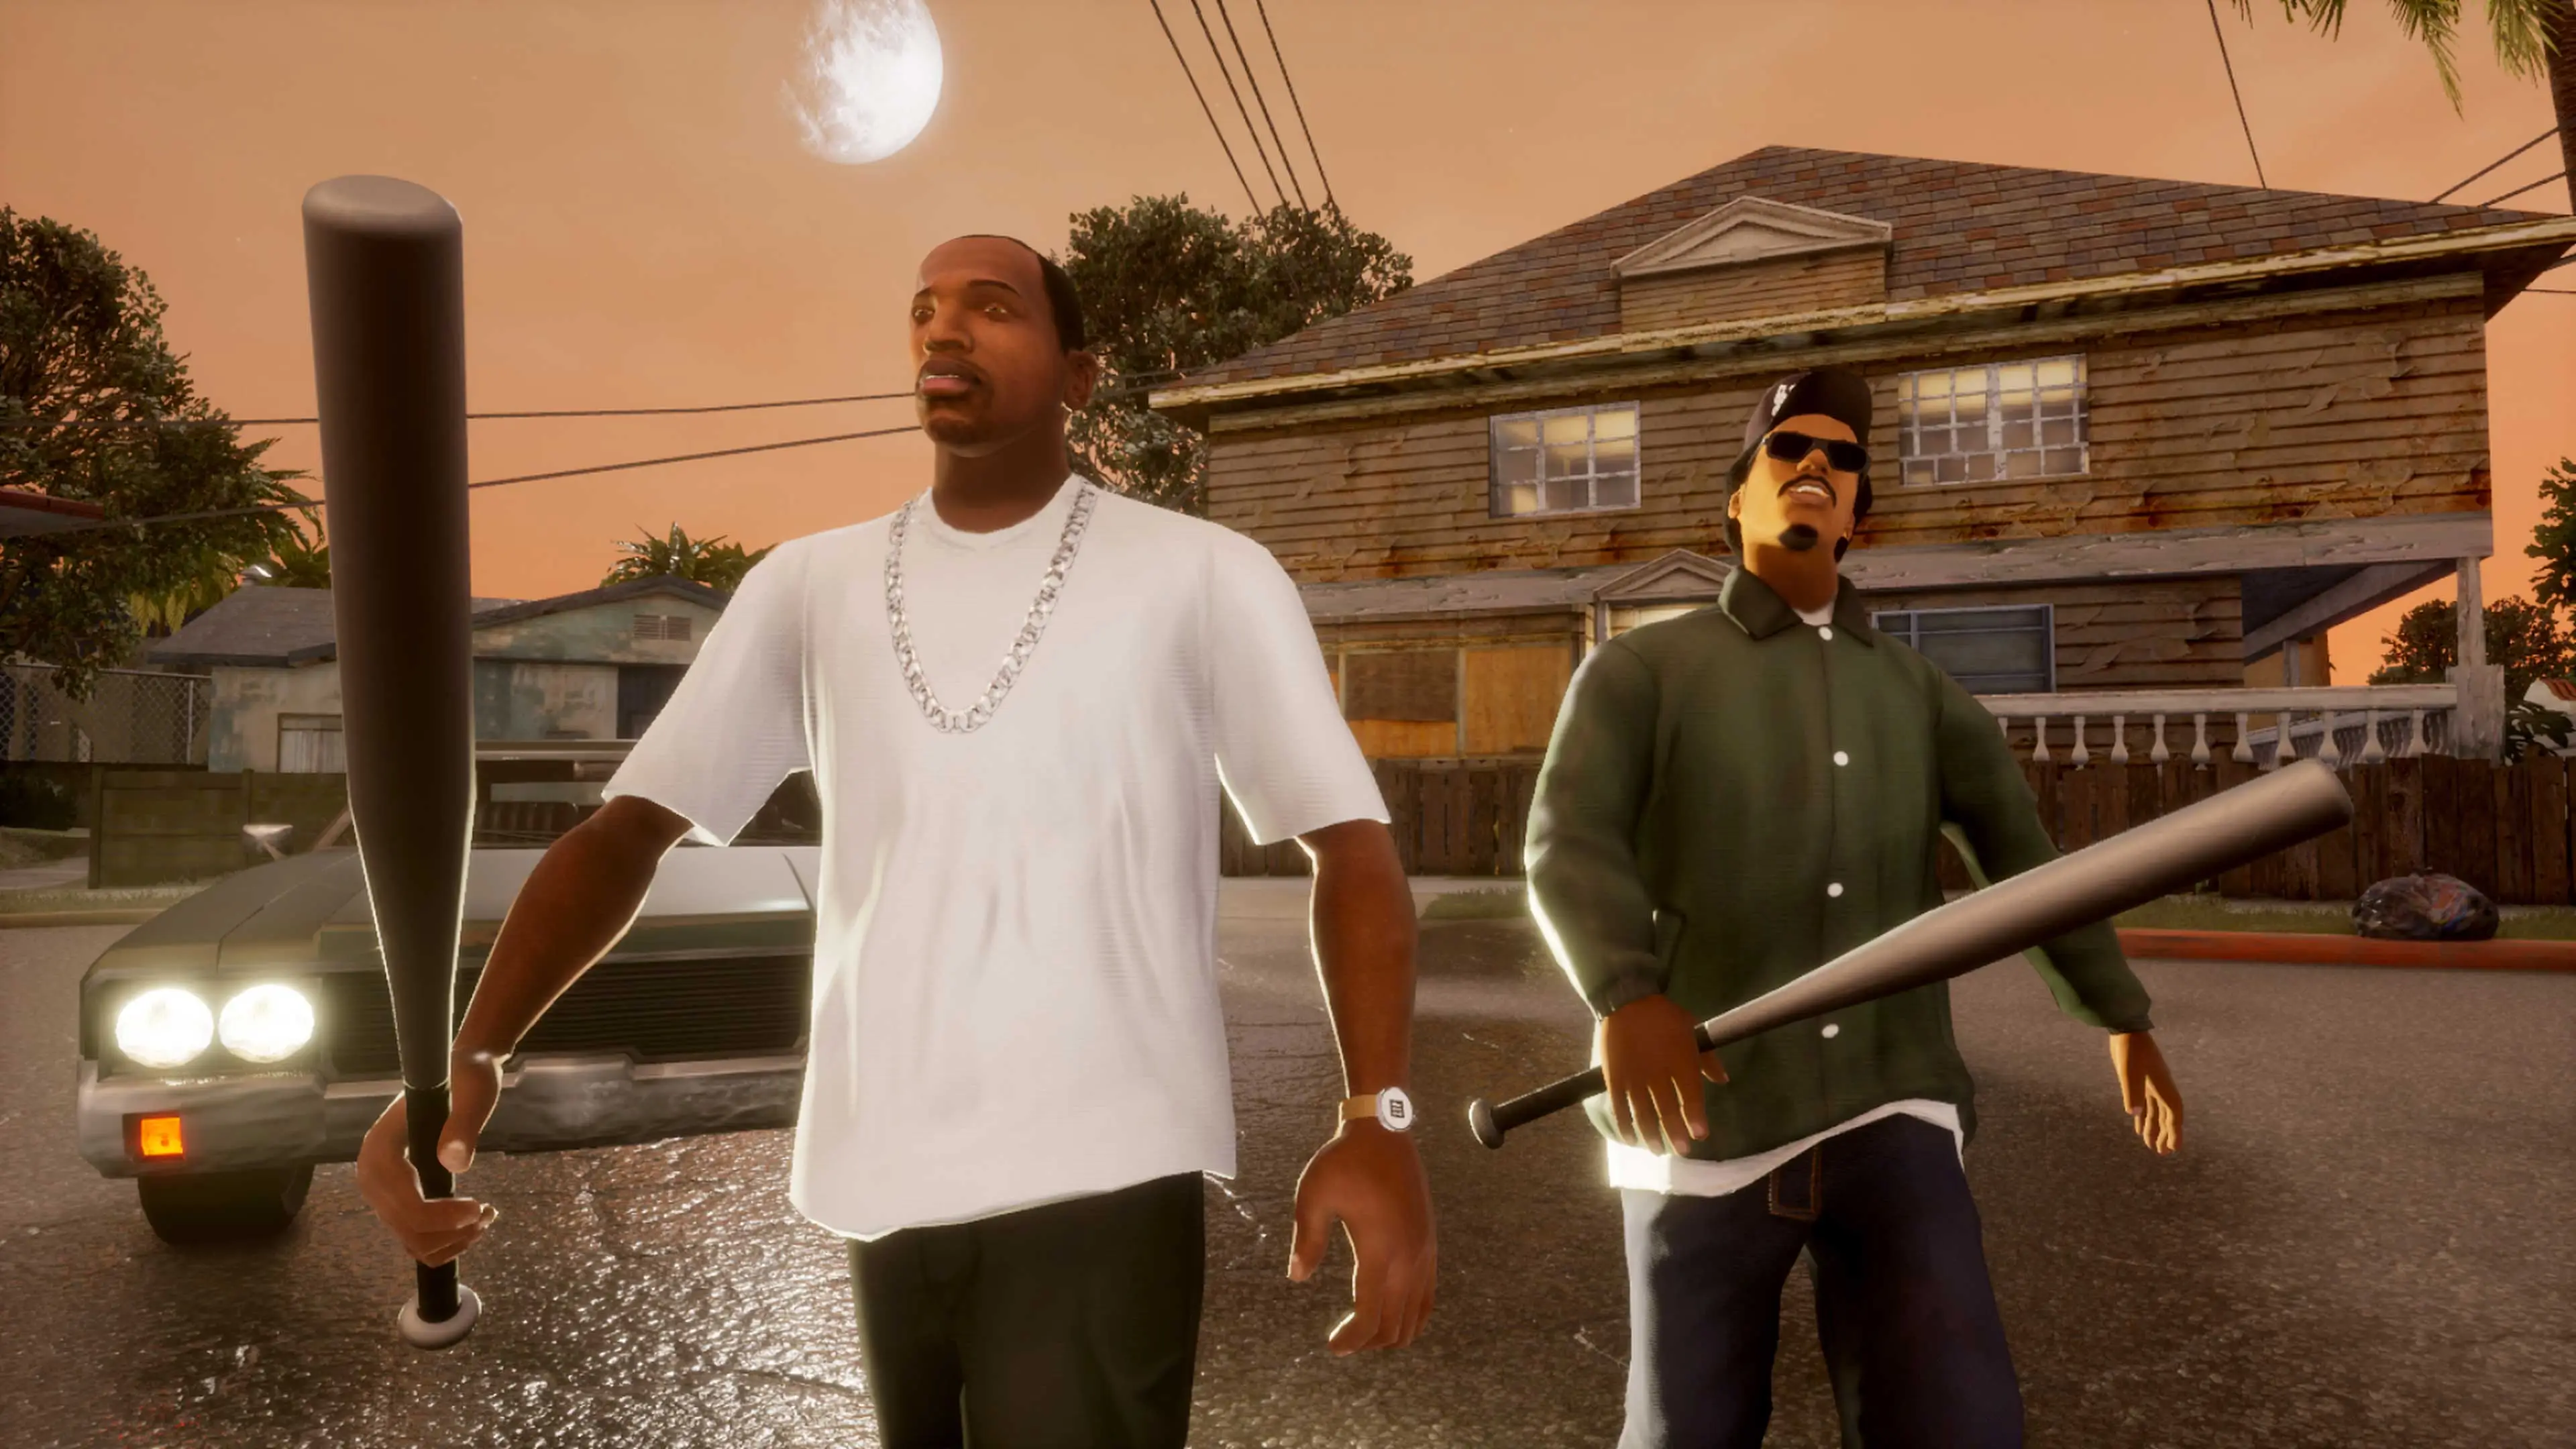 Download The Rockstar Games Launcher and Get GTA: San Andreas for Free  (PC)